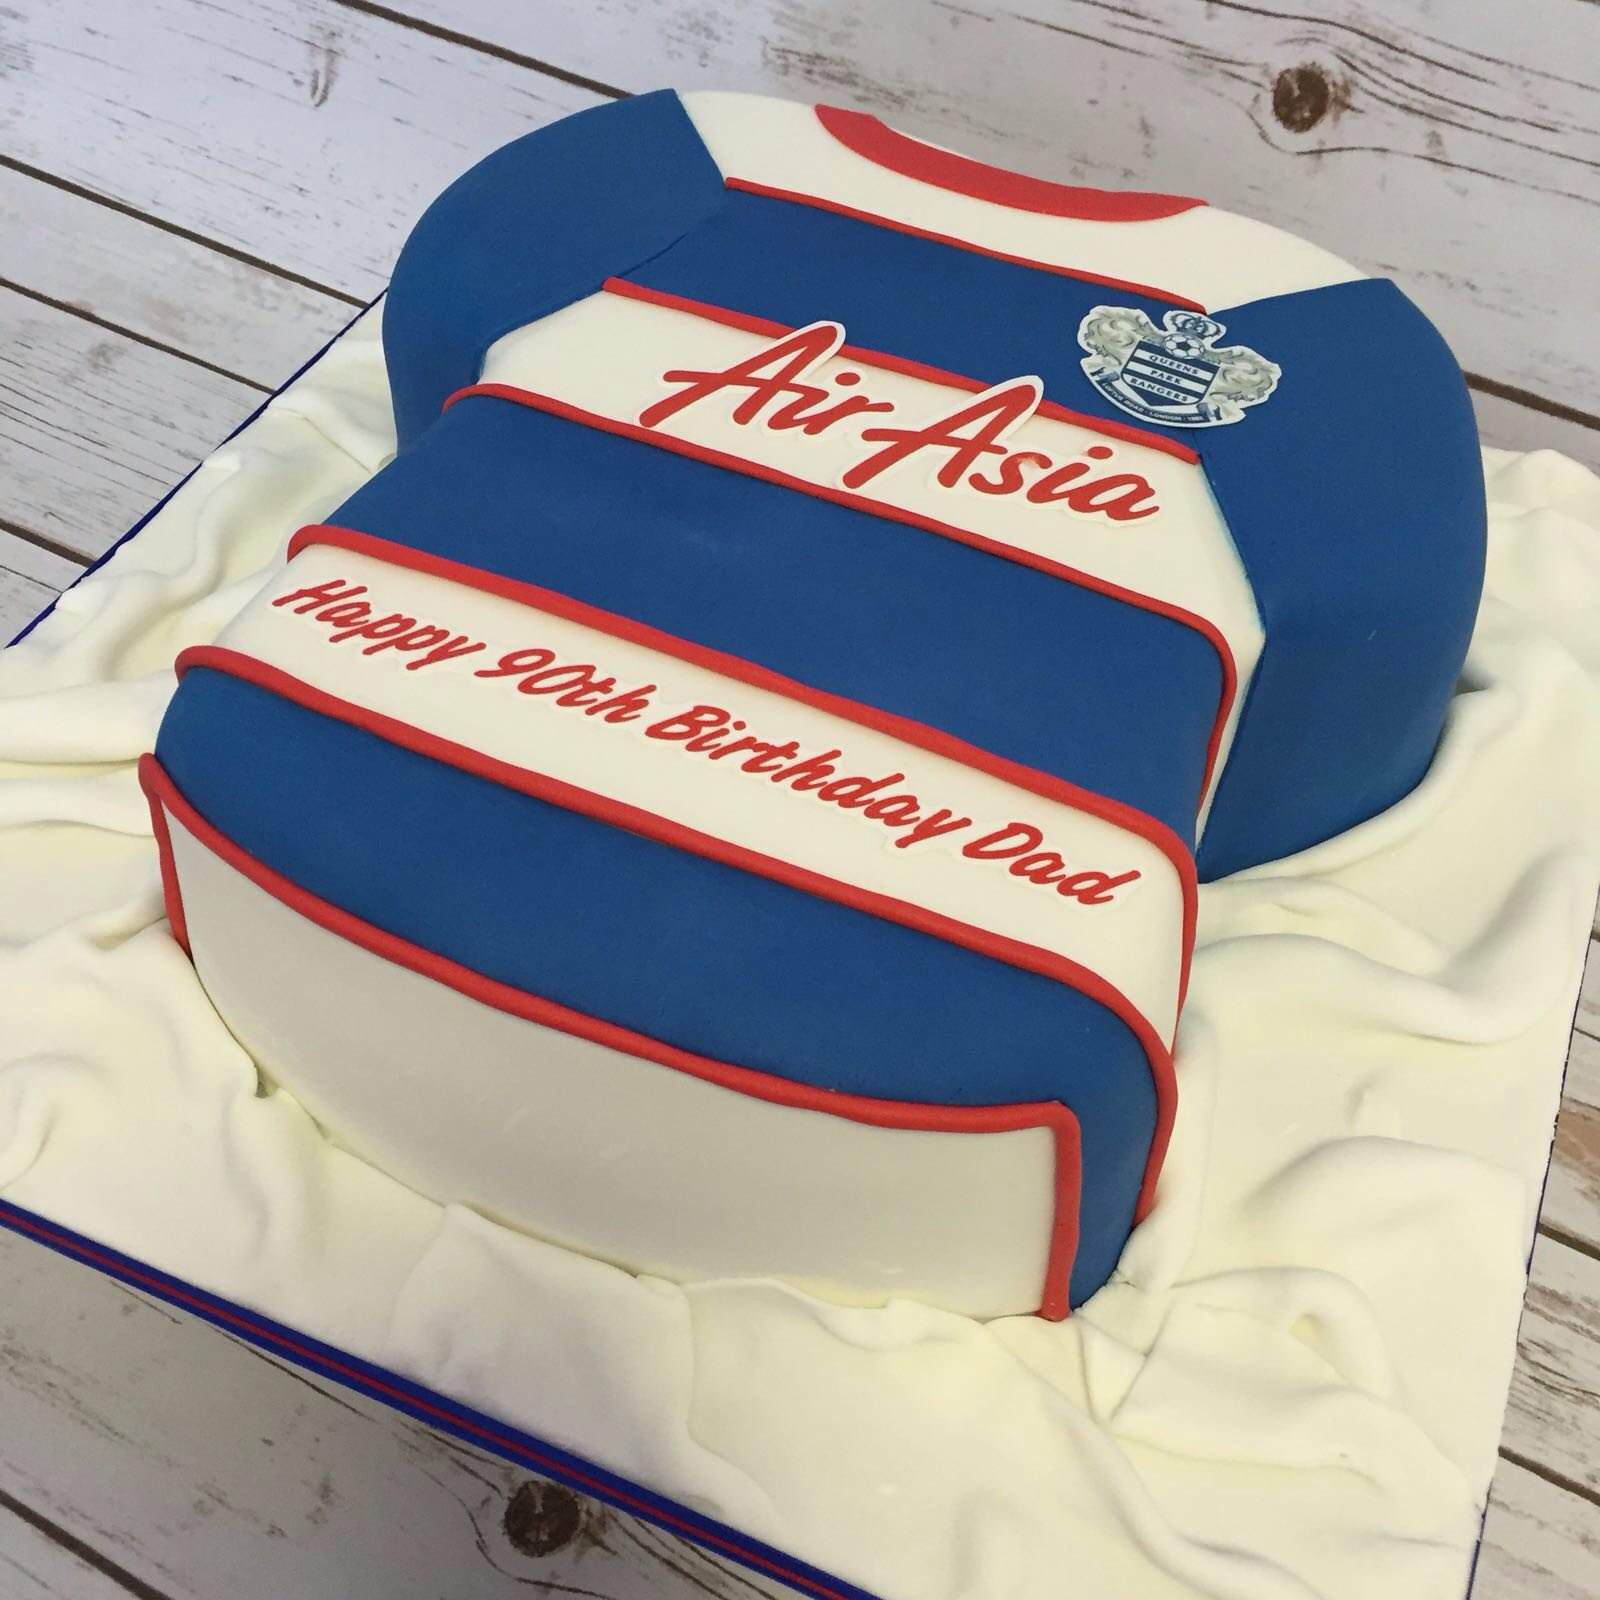 Uniform Shirt Cake | Cake Delivery in Lagos